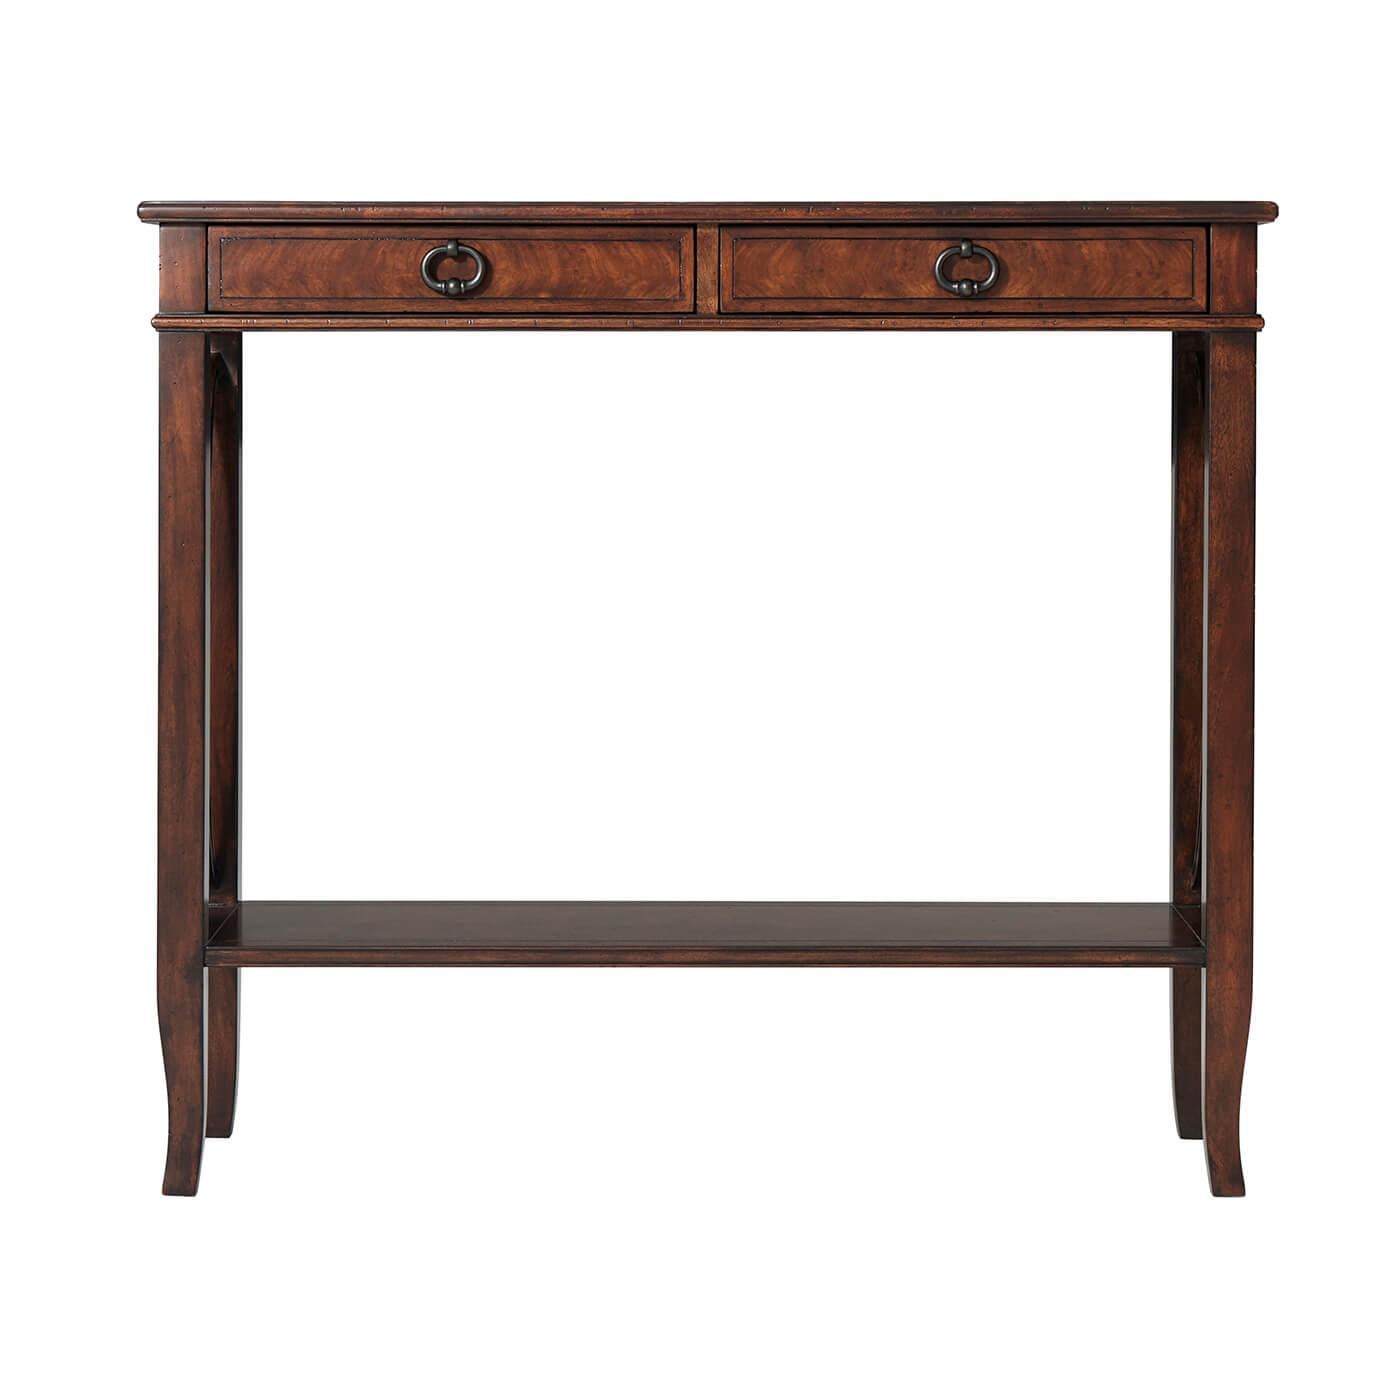 A French neoclassic mahogany console table, the rectangular crossbanded and molded edge top above two frieze drawers, on square legs joined to the sides by wavy x stretchers and on splayed legs, joined by a crossbanded under tier. 

Dimensions: